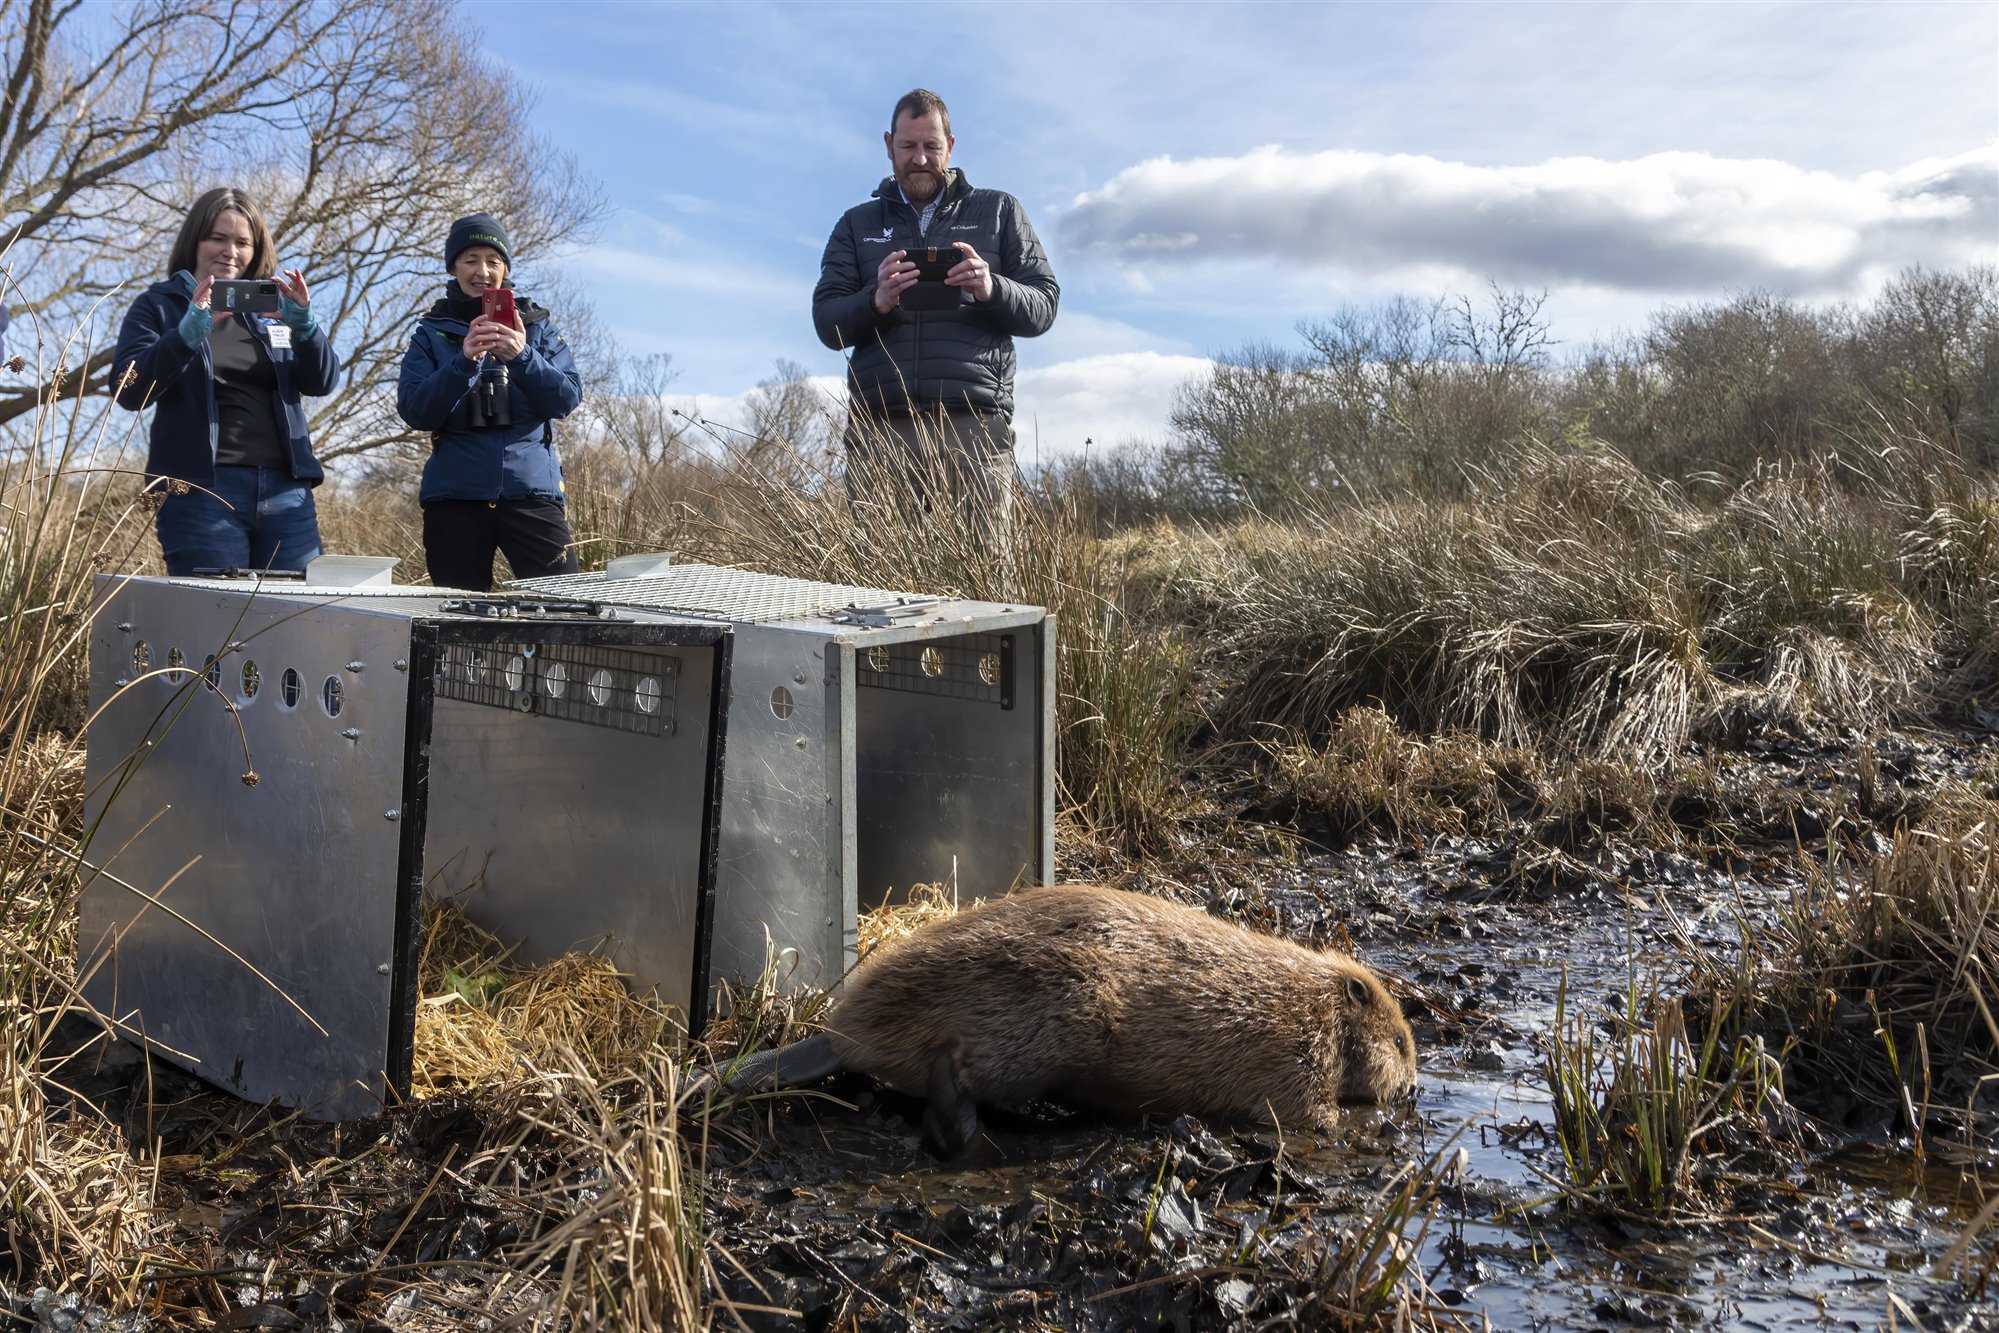 Three people watching a Beaver leaving a large metal crate heading towards water.